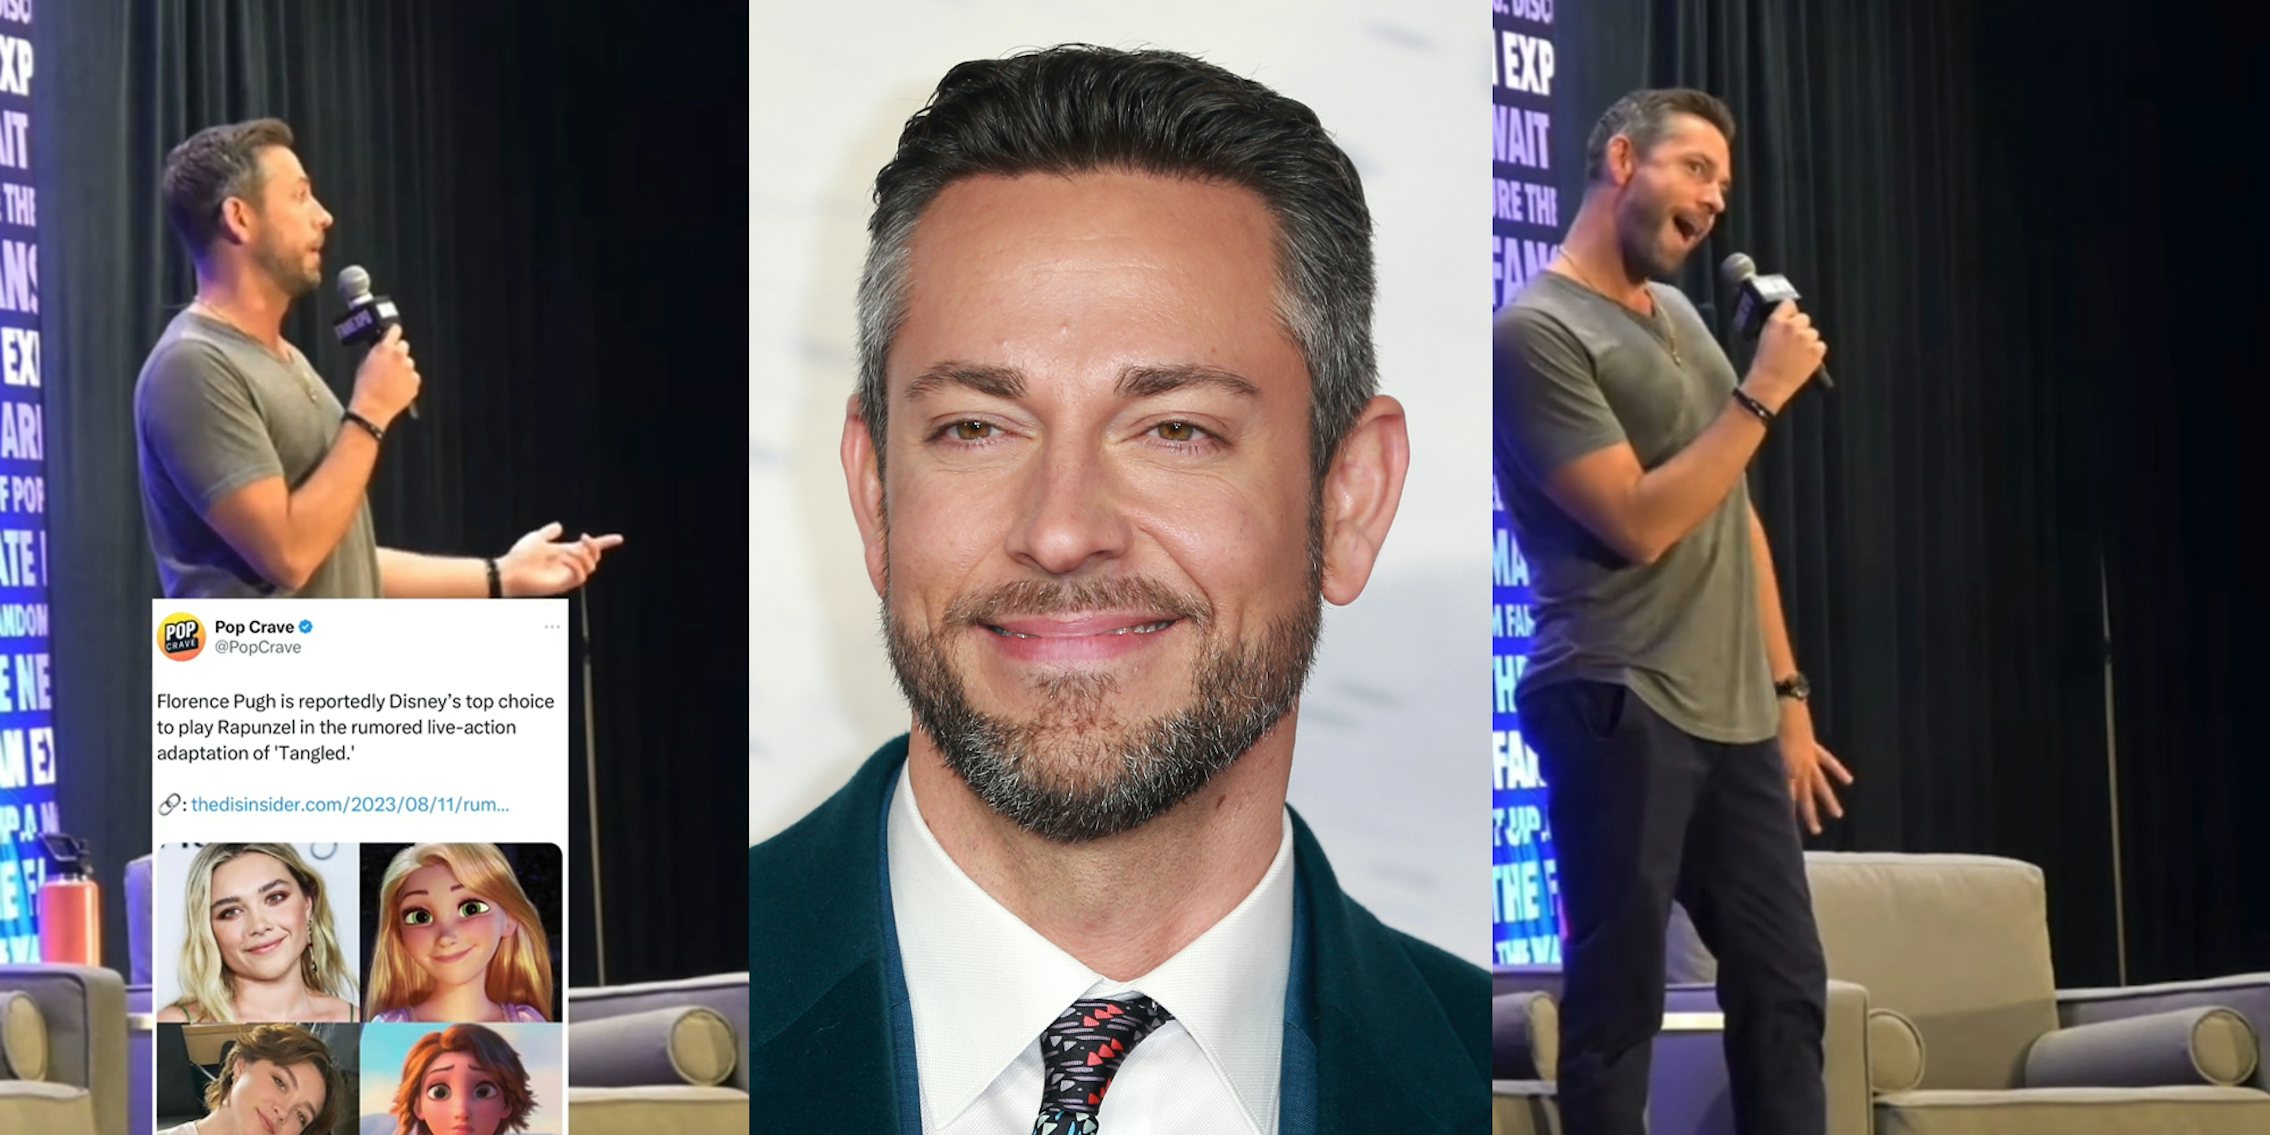 Zachary Levi speaking into microphone on stage with image of Tweet by Pop Culture (l) Zachary Levi in front of white background (c) Zachary Levi speaking into a microphone on stage (r)